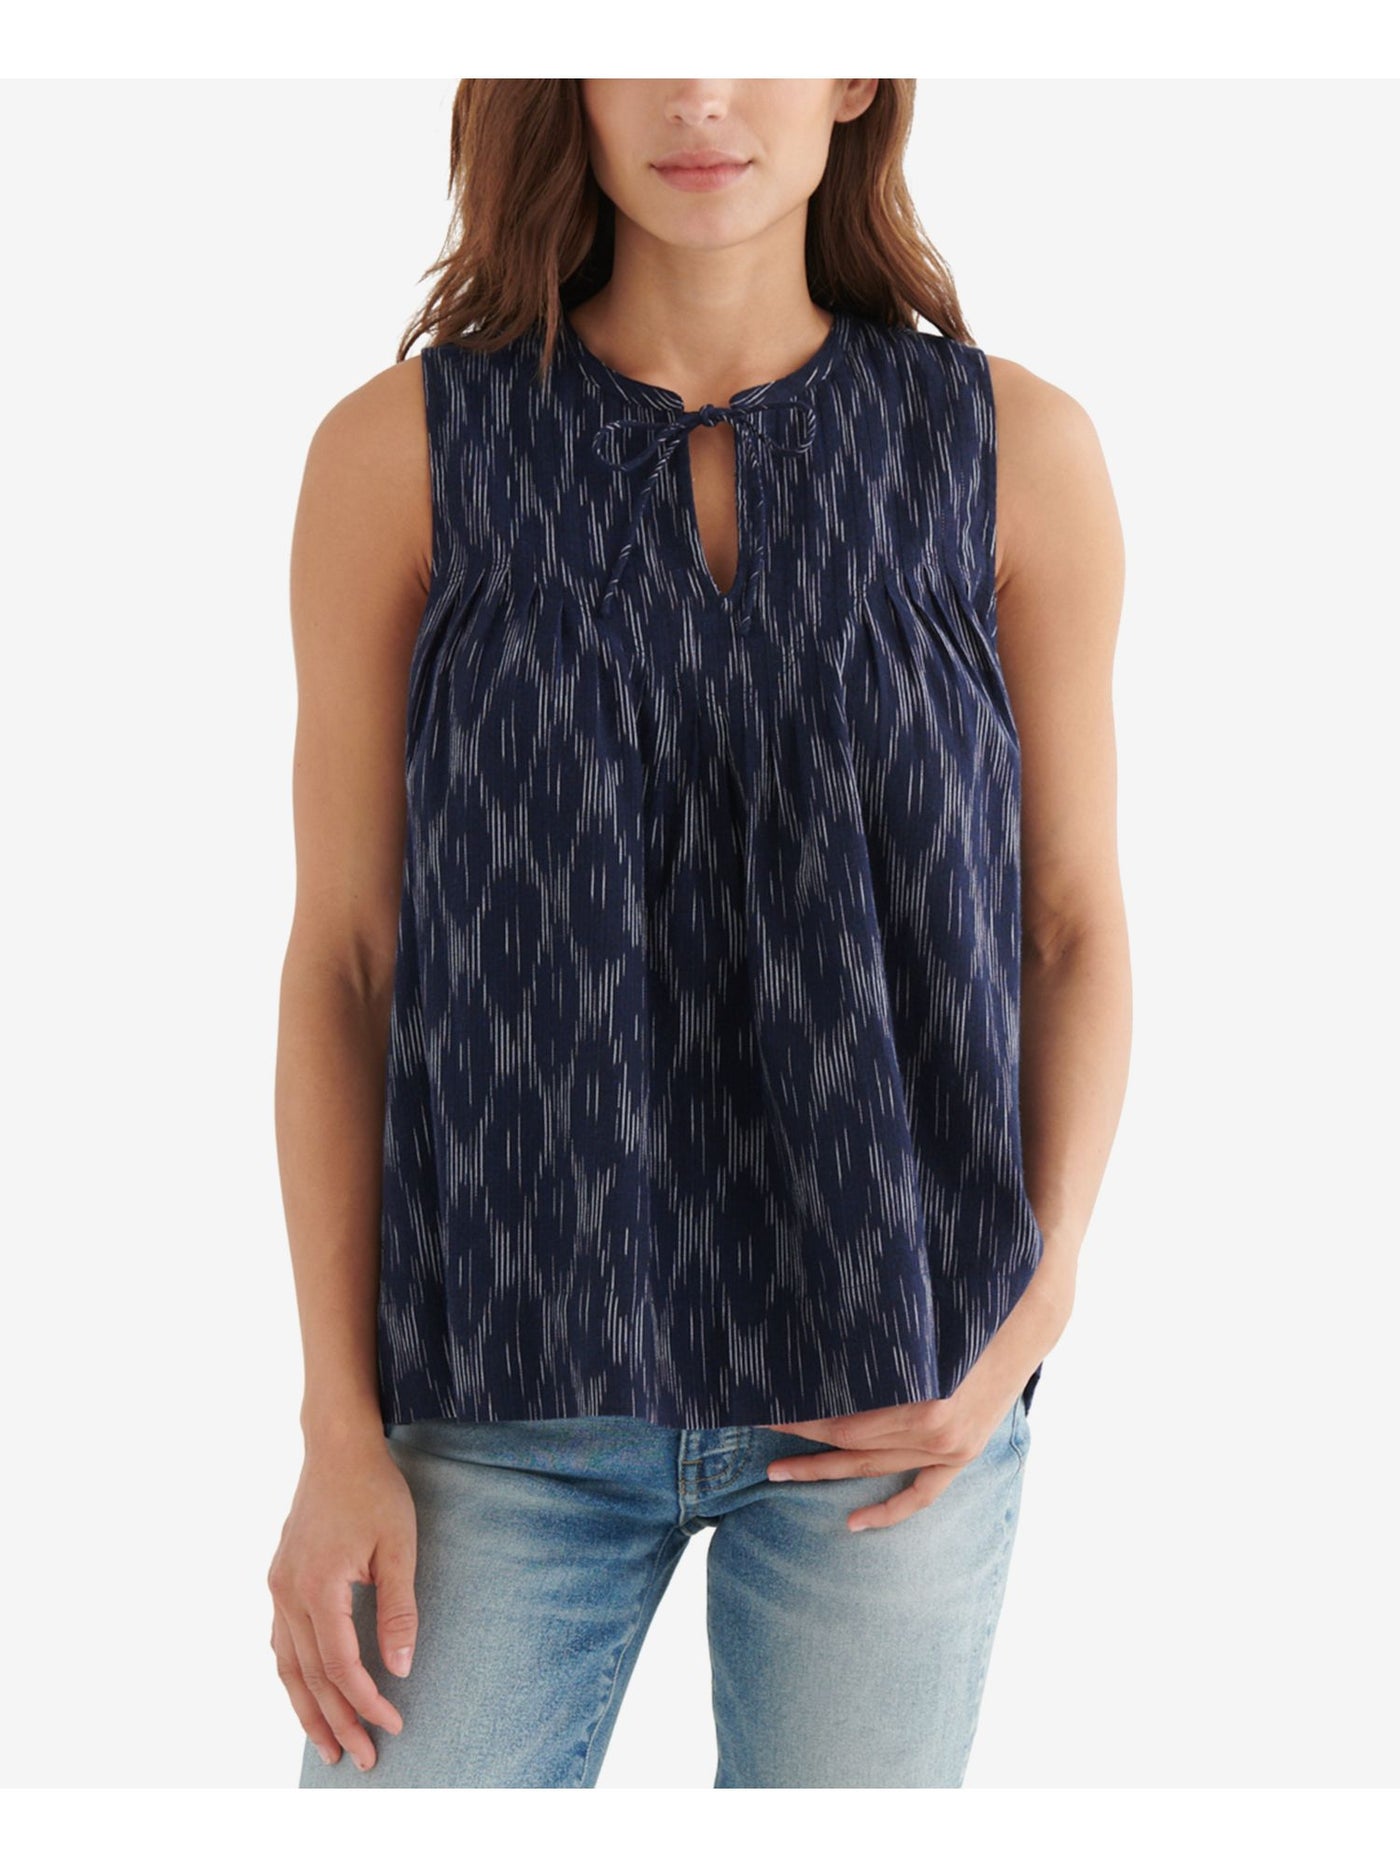 LUCKY BRAND Womens Navy Pleated Relaxed Fit Printed Sleeveless Tie Neck Top XS